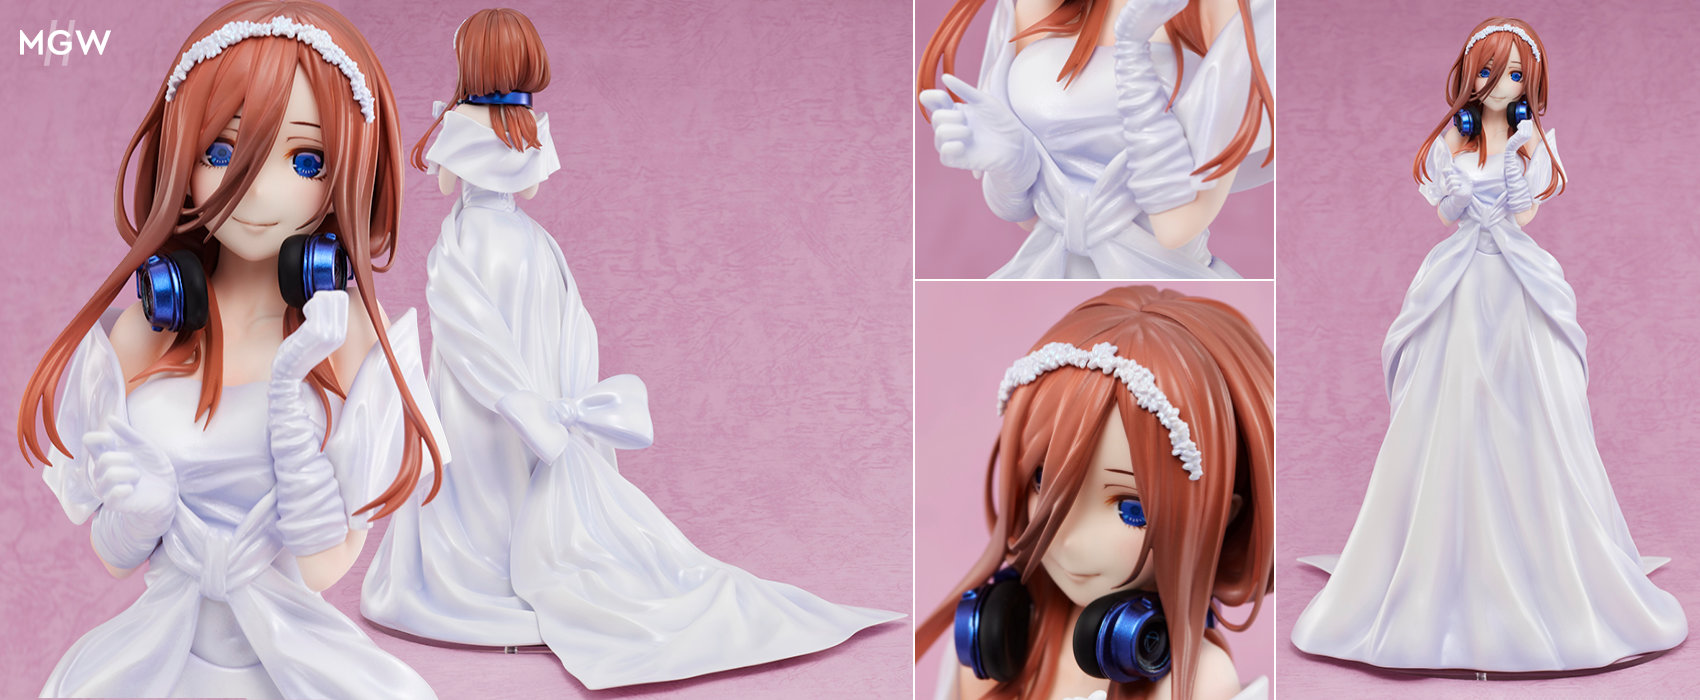 Nakano Miku Wedding Ver. by AMAKUNI from The Quintessential Quintuplets